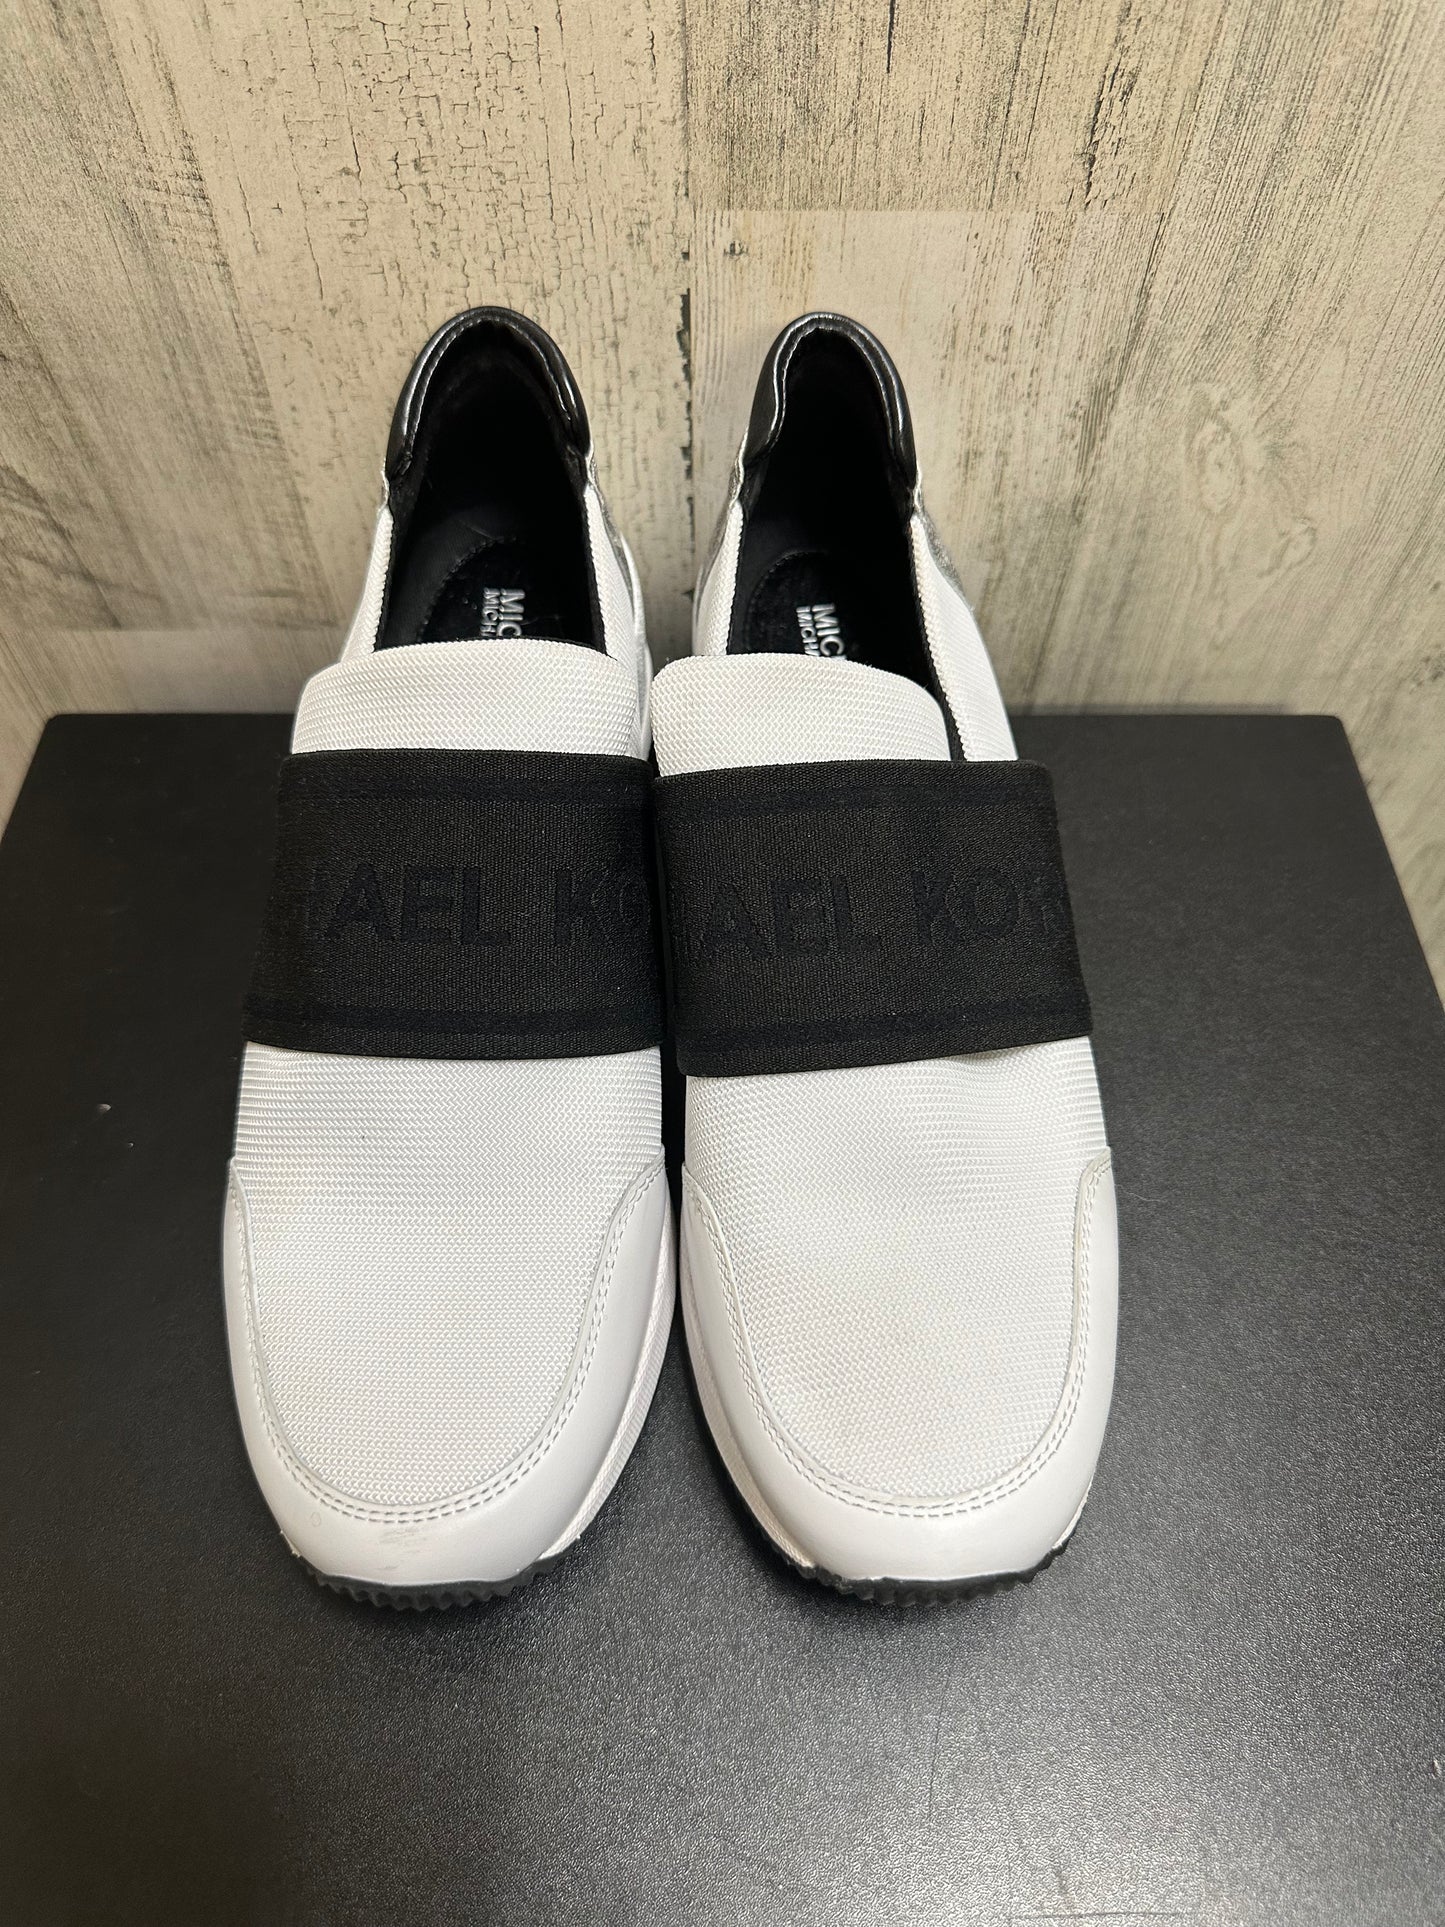 White Shoes Sneakers Michael Kors, Size 8